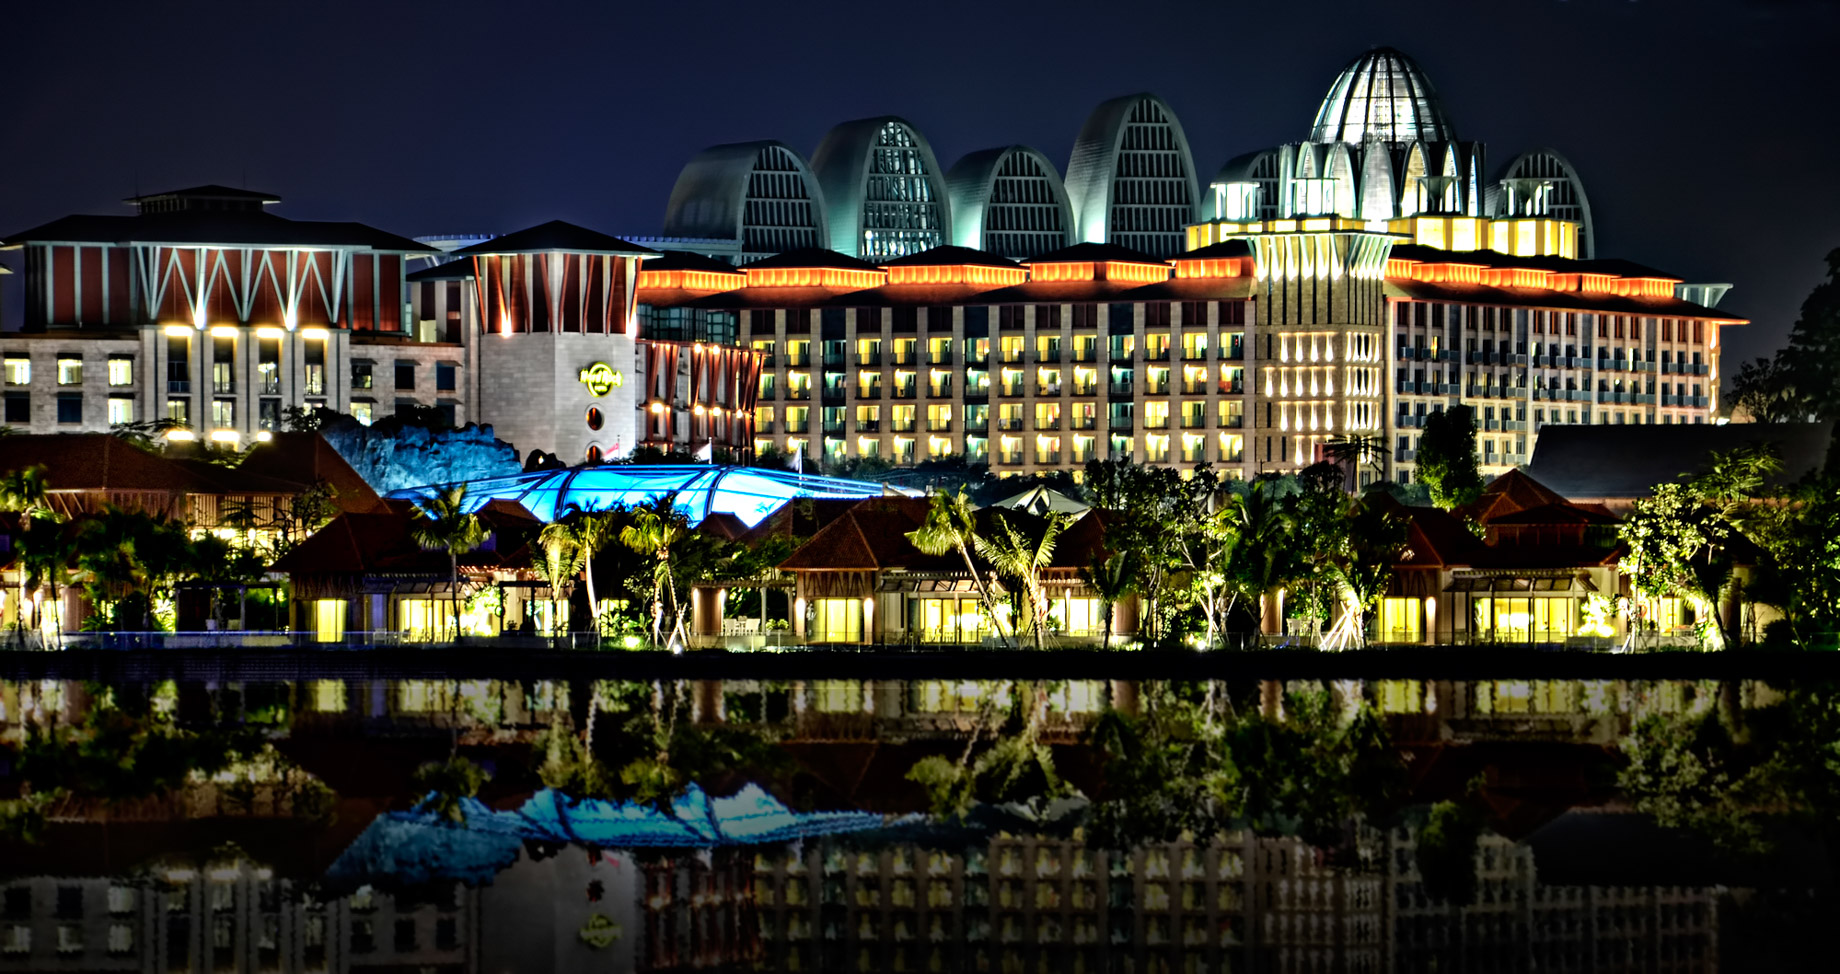 Resorts World Sentosa Singapore - Billion Dollar Buildings - The Most Expensive Casino Properties in the World